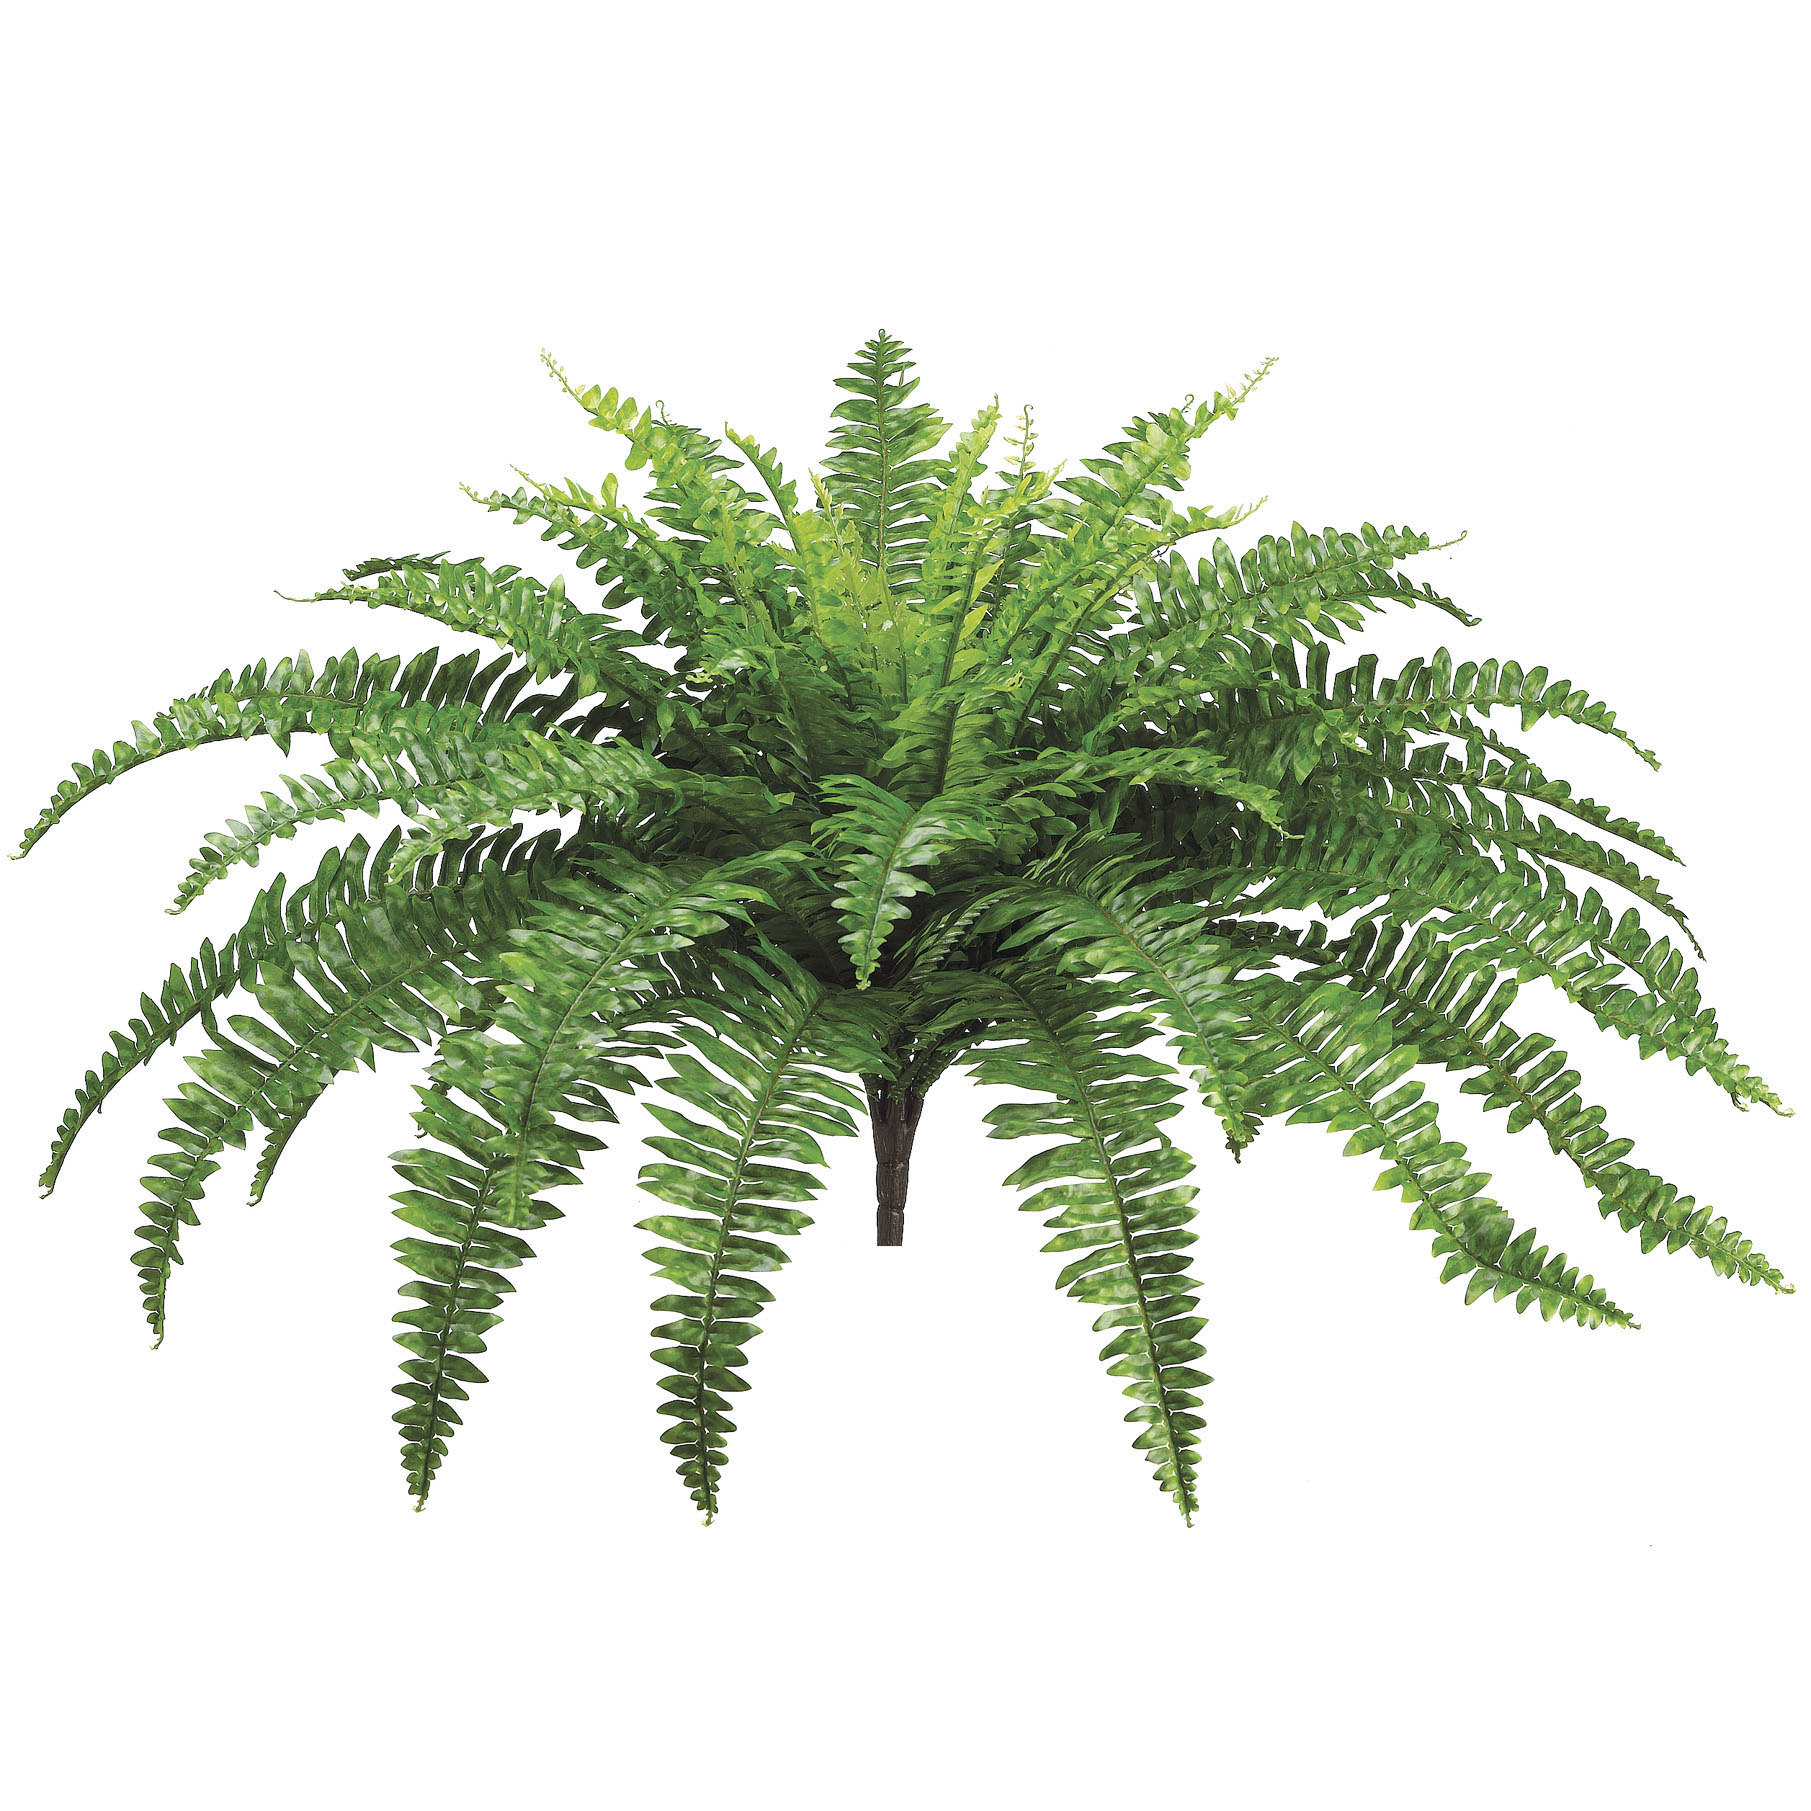 Albums 97+ Pictures Types Of Outdoor Ferns With Pictures Full HD, 2k, 4k